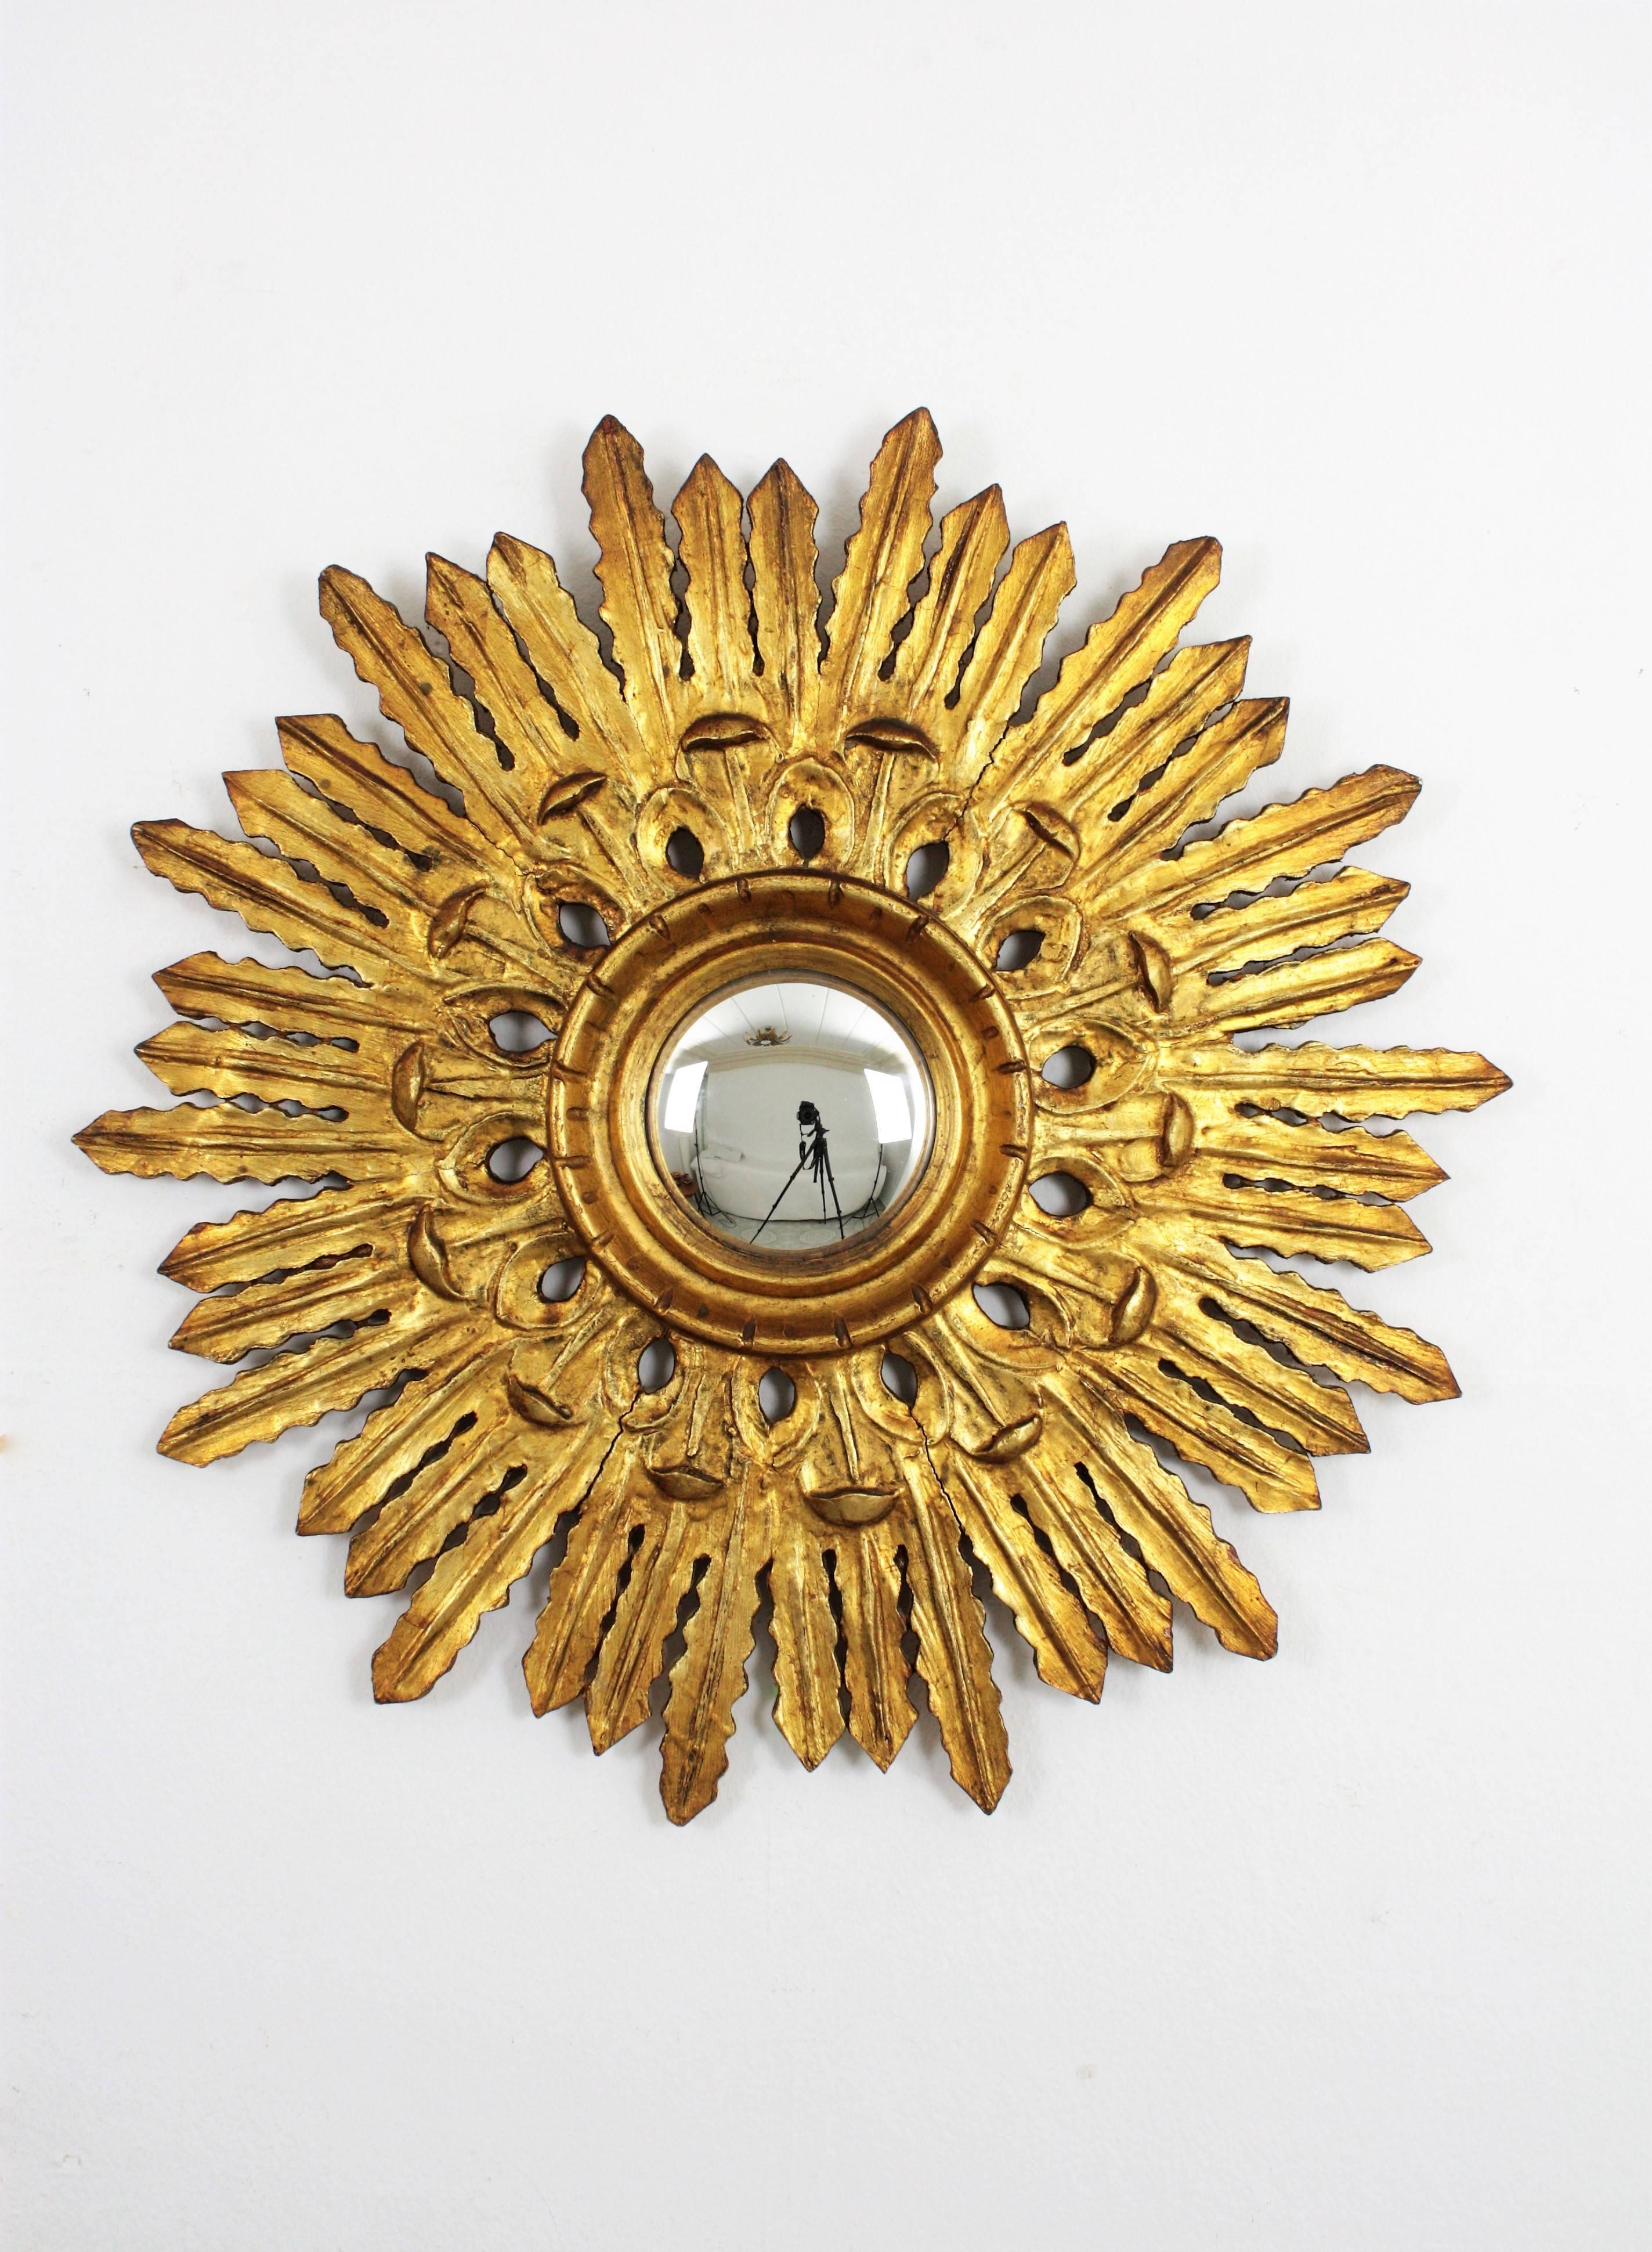 Gesso 1920s Spanish Baroque Style Carved and Gold Giltwood Sunburst Convex Mirror